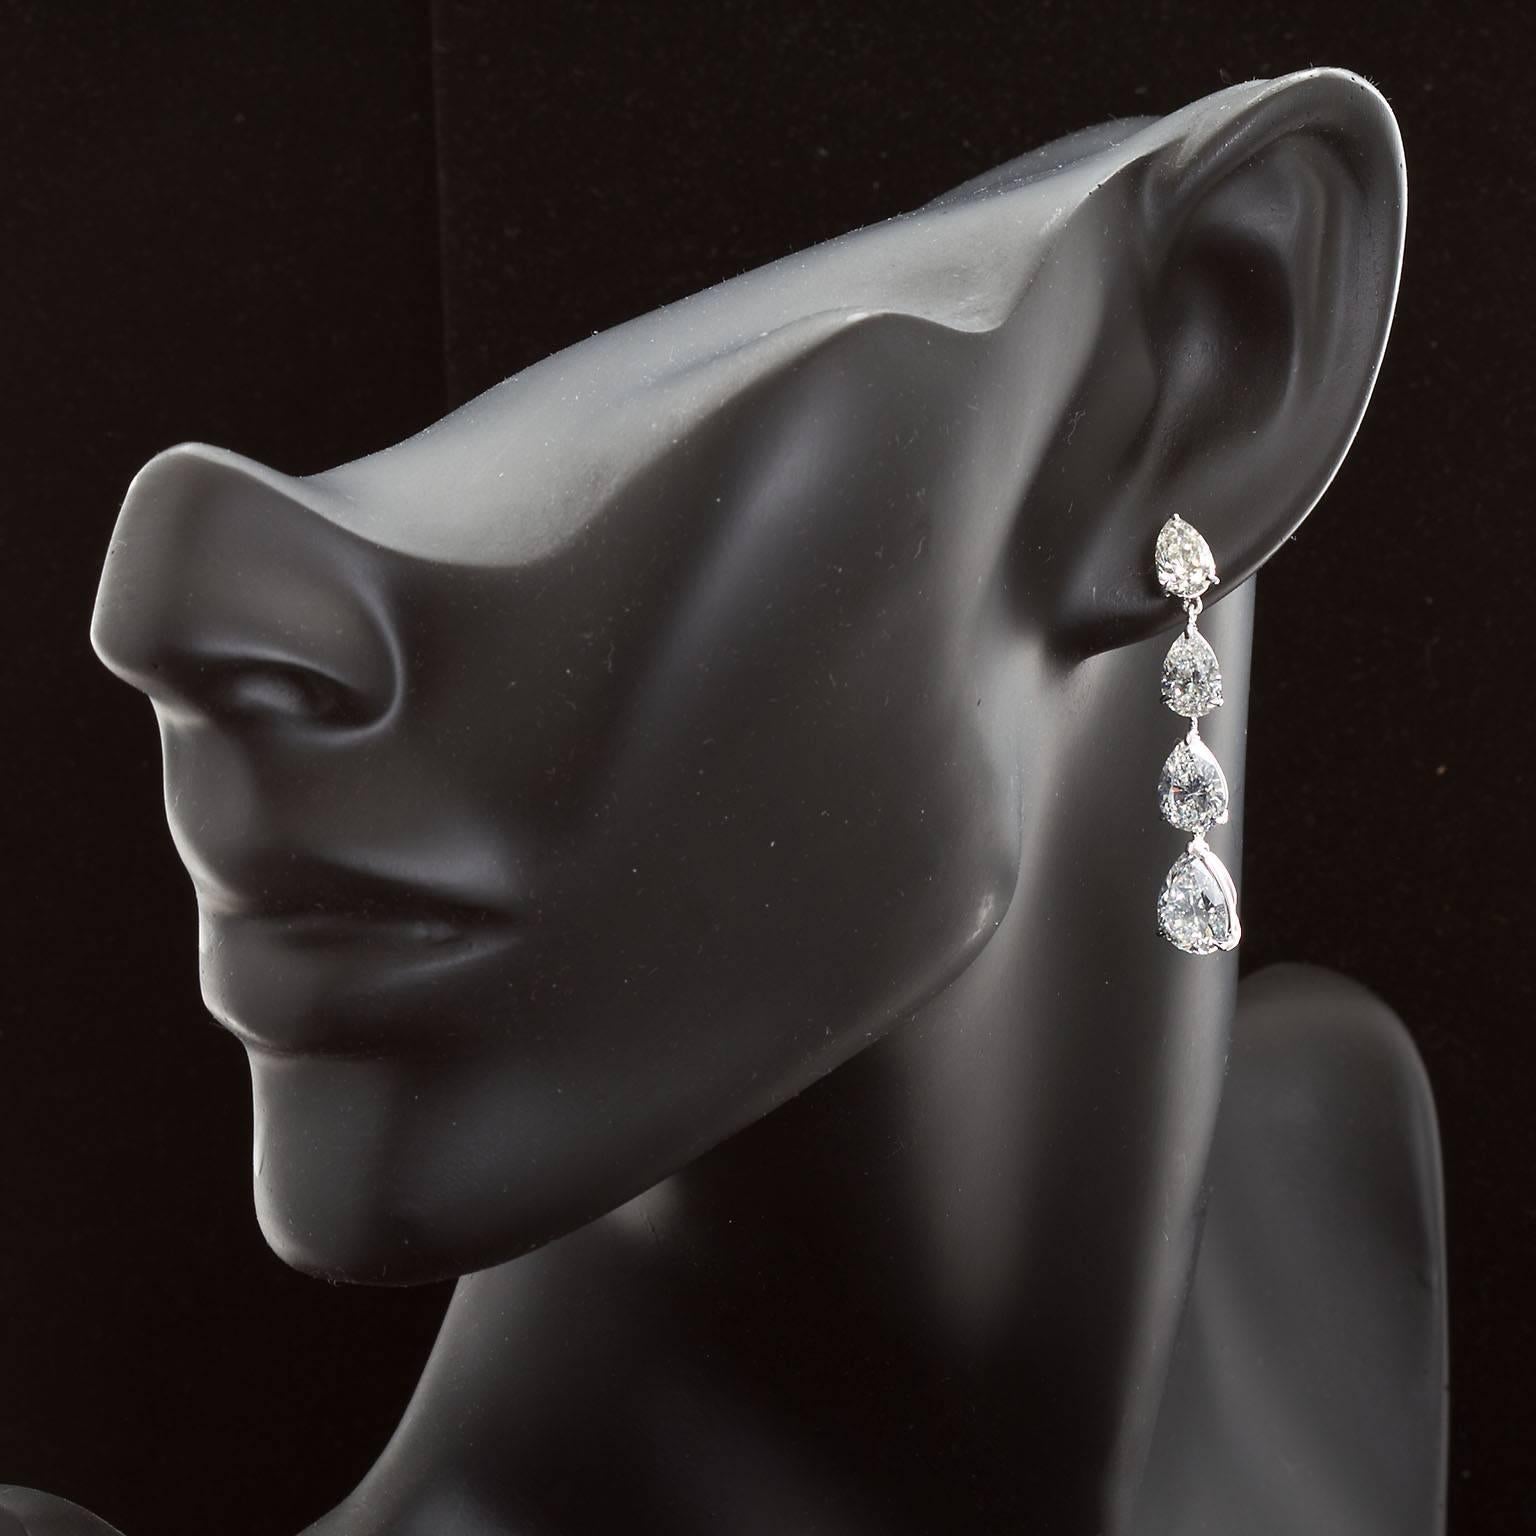 A pair of very fine diamond in platinum long dangle earrings. Set with eight pear shape diamonds ranging in size from 0.99 ct to 2.43 ct. G-I color Vs-SI clarity. 11.83 carats total weight. Some have GIA certificates. These earrings are extremely